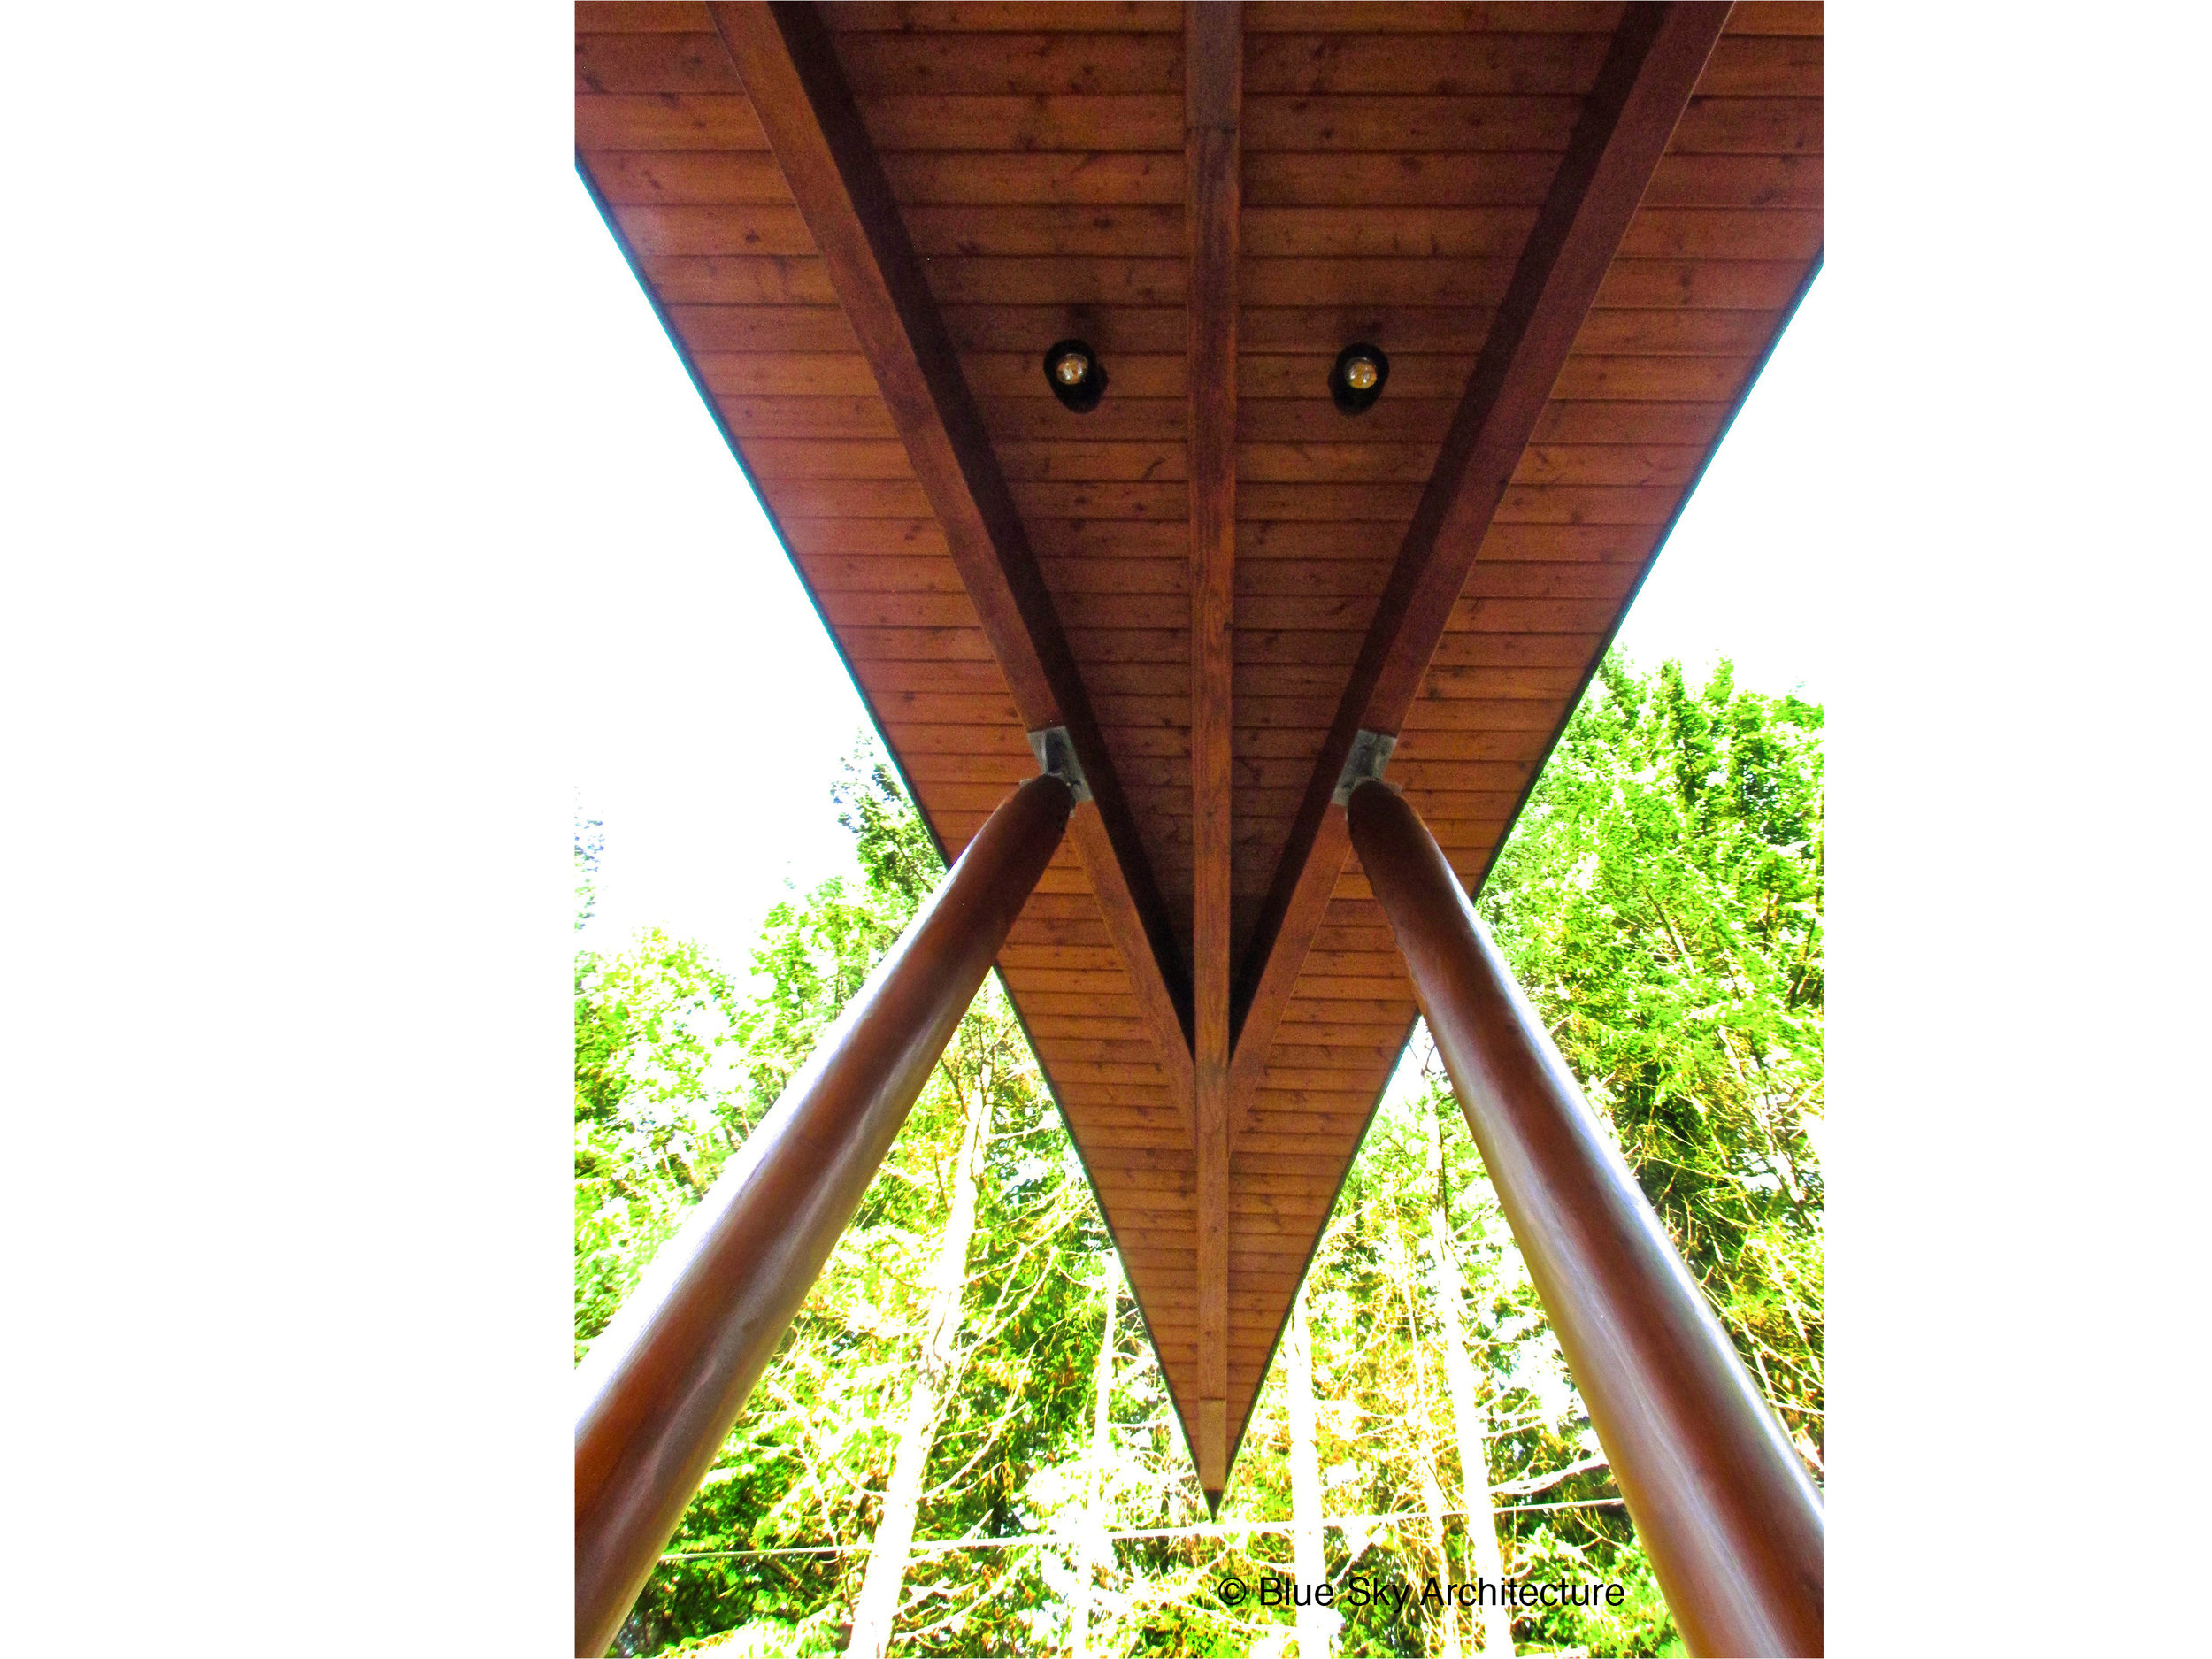 Triangular Point Roof Sloped Columns